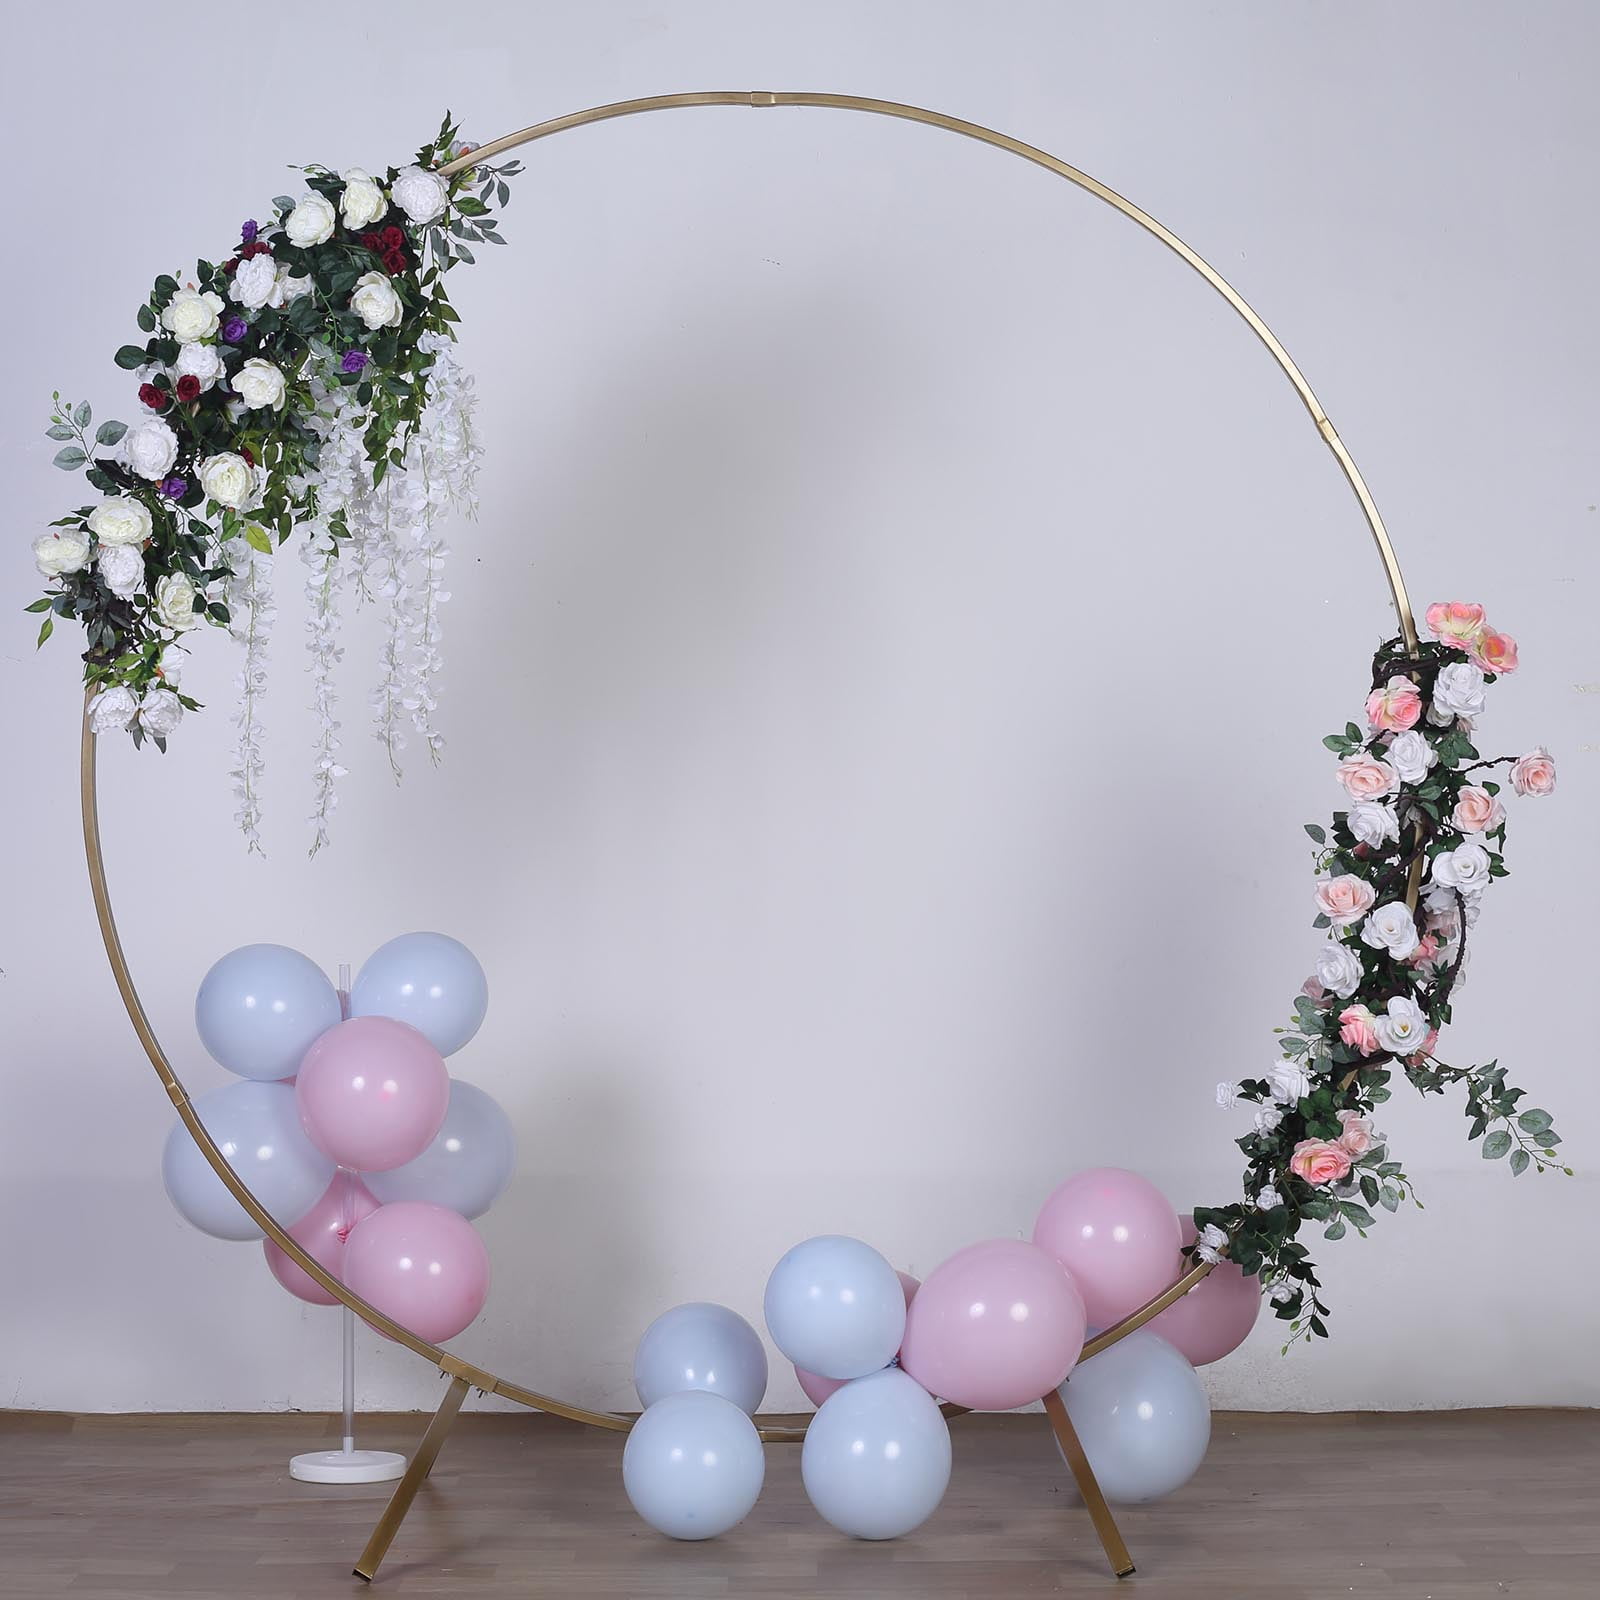 6.6ft 2M Large Size Hexagon Metal Balloon Arch Stand Wedding Arch Frame Metal Arch for DIY Party Wedding Decoration 6.6ft 2M 